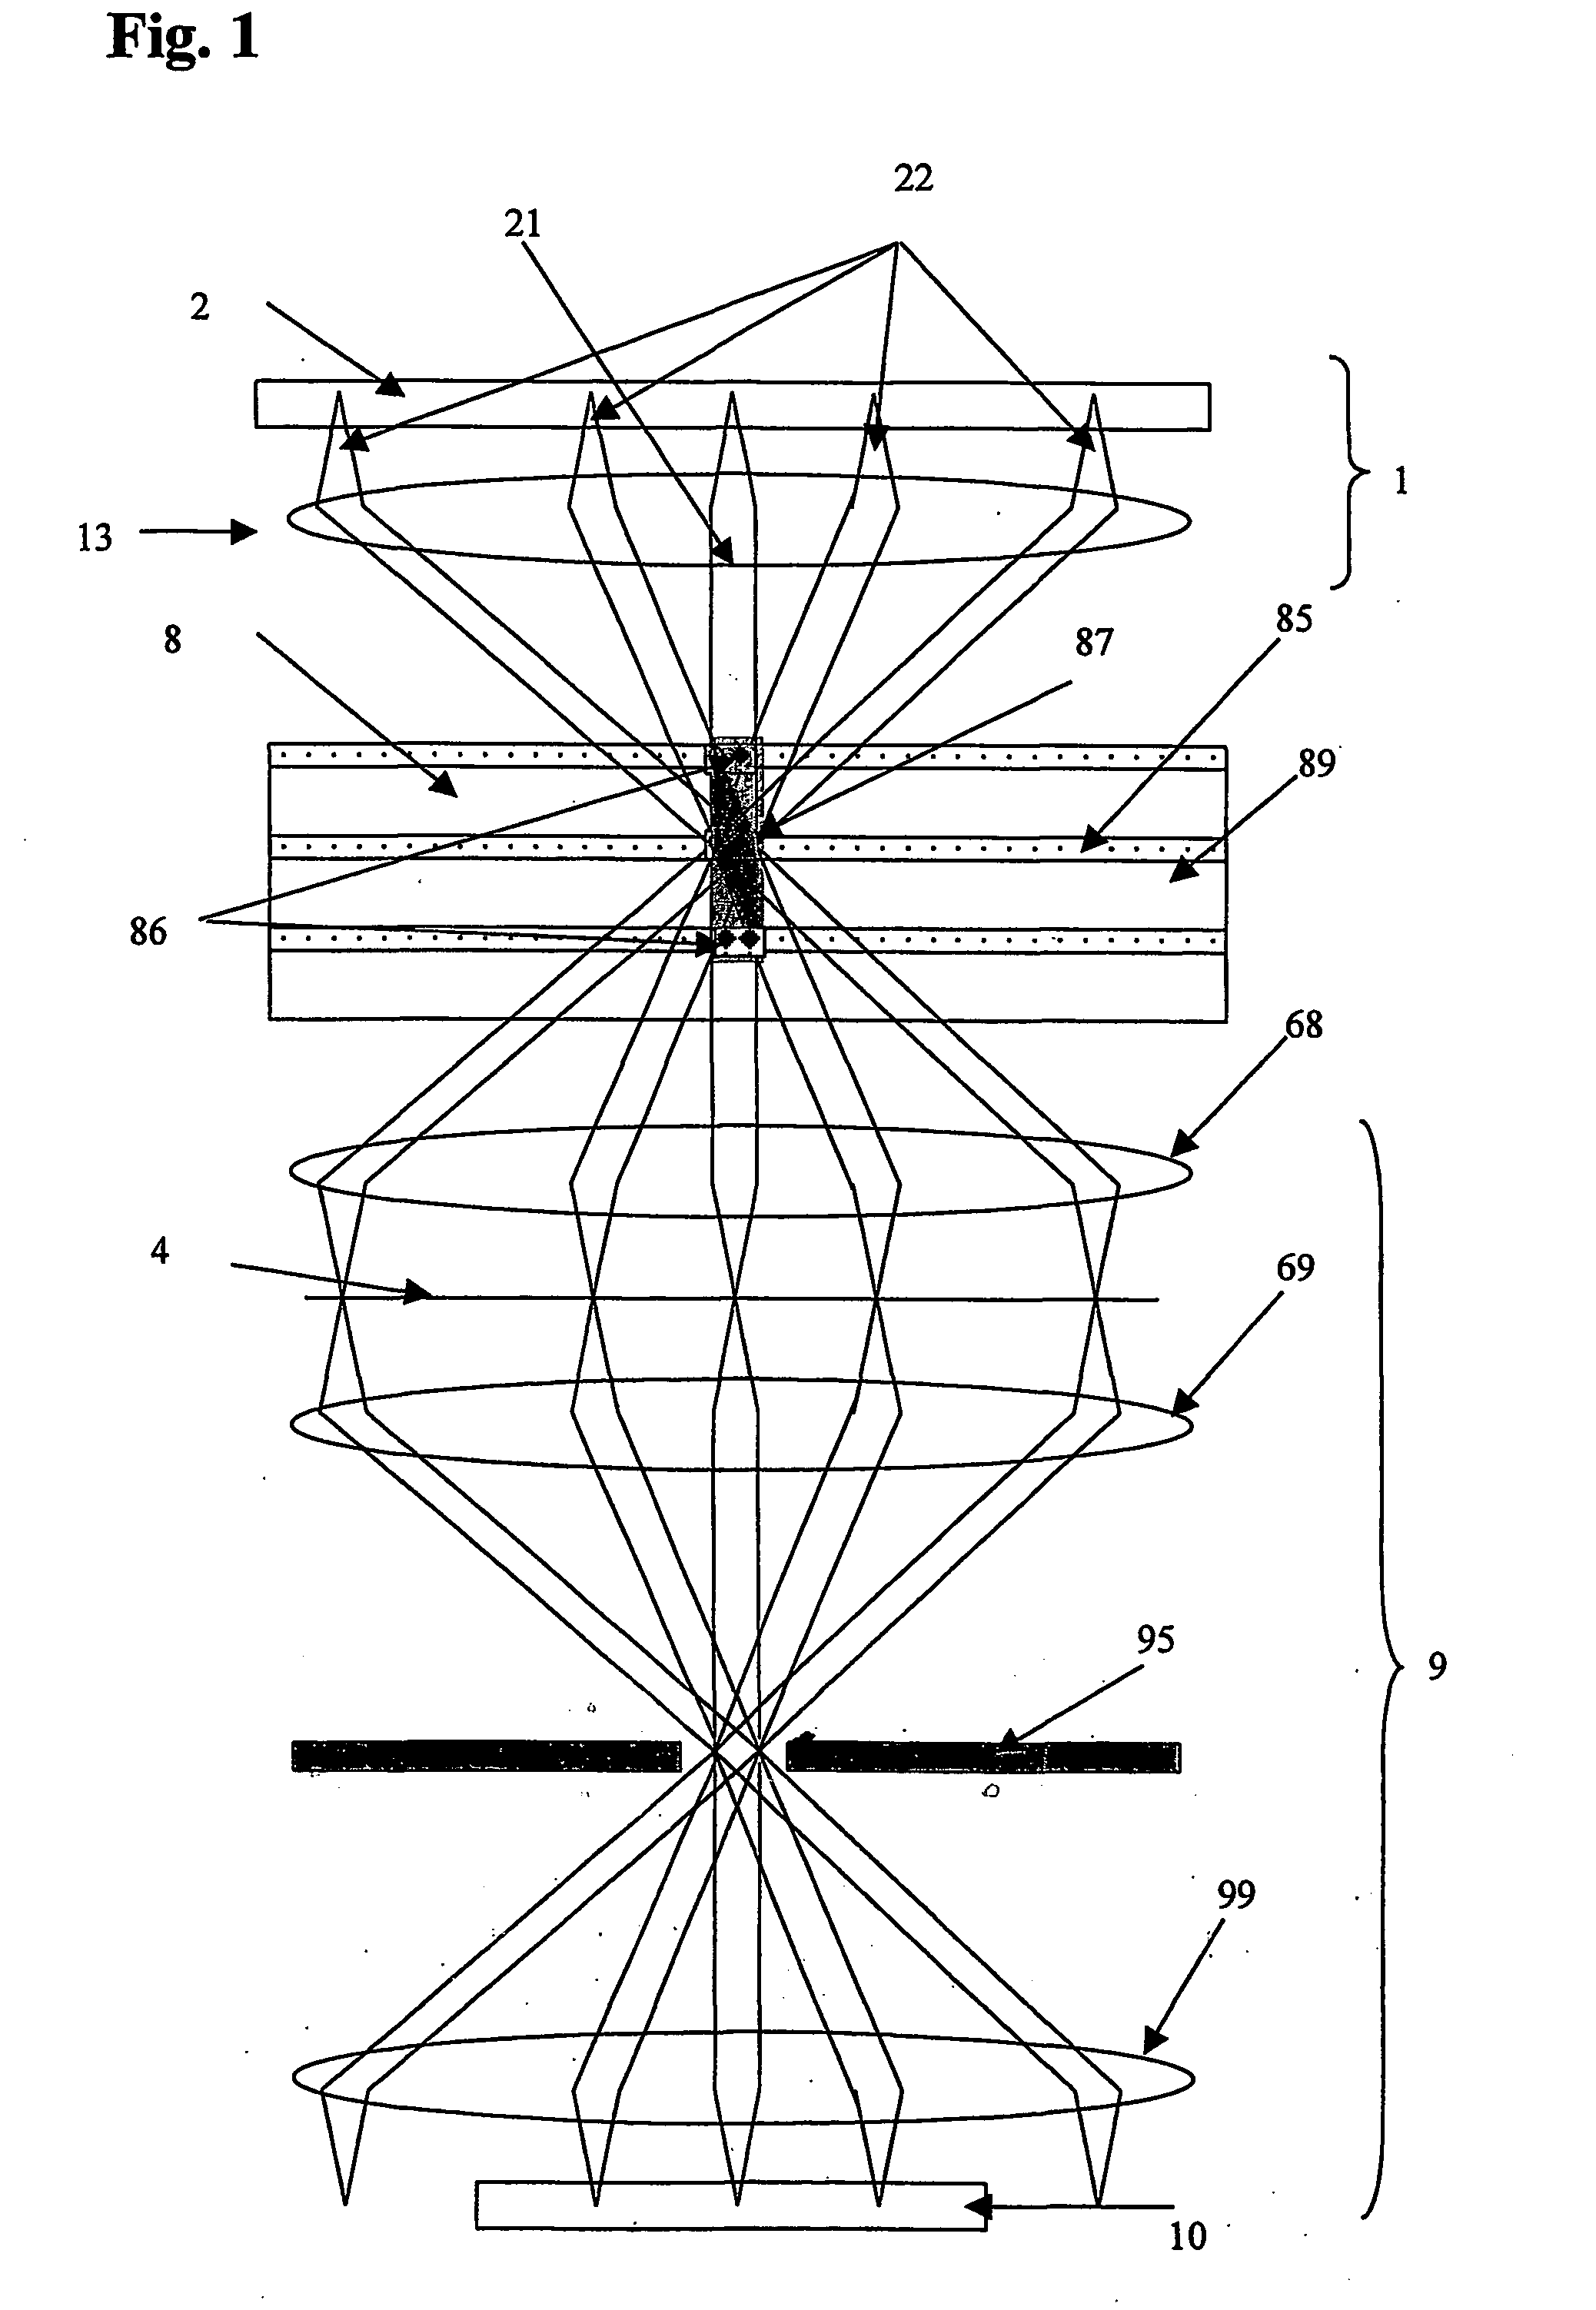 High Data Density Volumetic Holographic Data Storage Method and System